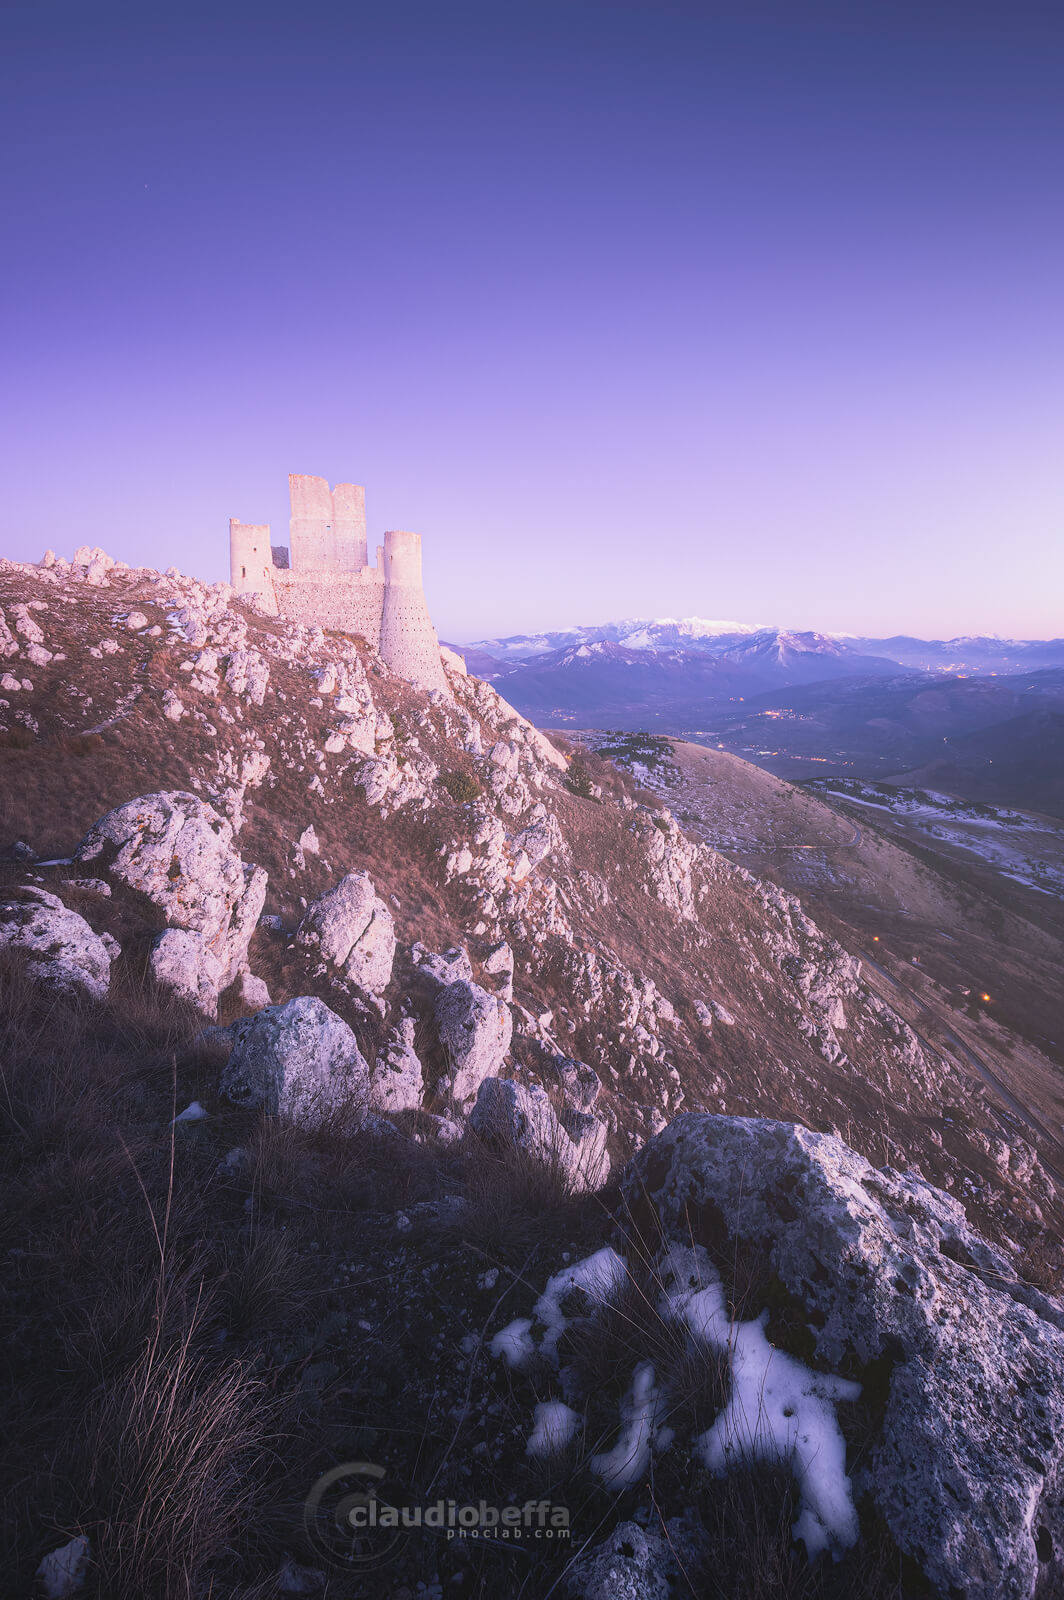 Light on the fortress, Rocca Calascio, Abruzzo, fortress, stronghold, italy, landscape, mountains, apennines, winter, sunset, twilight